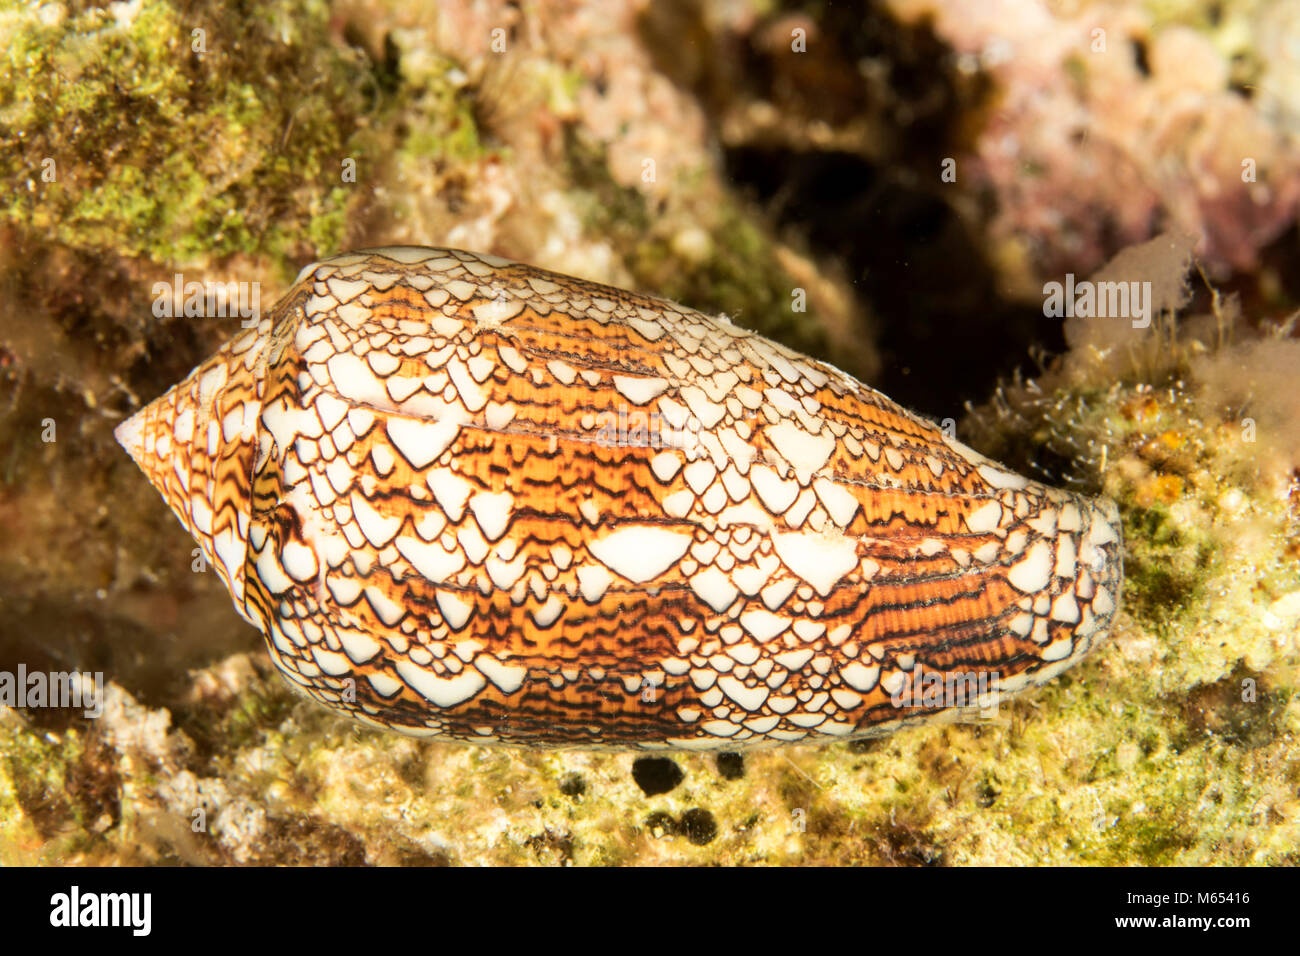 Textile cone snail out hunting in Papua New Guinea. Stock Photo